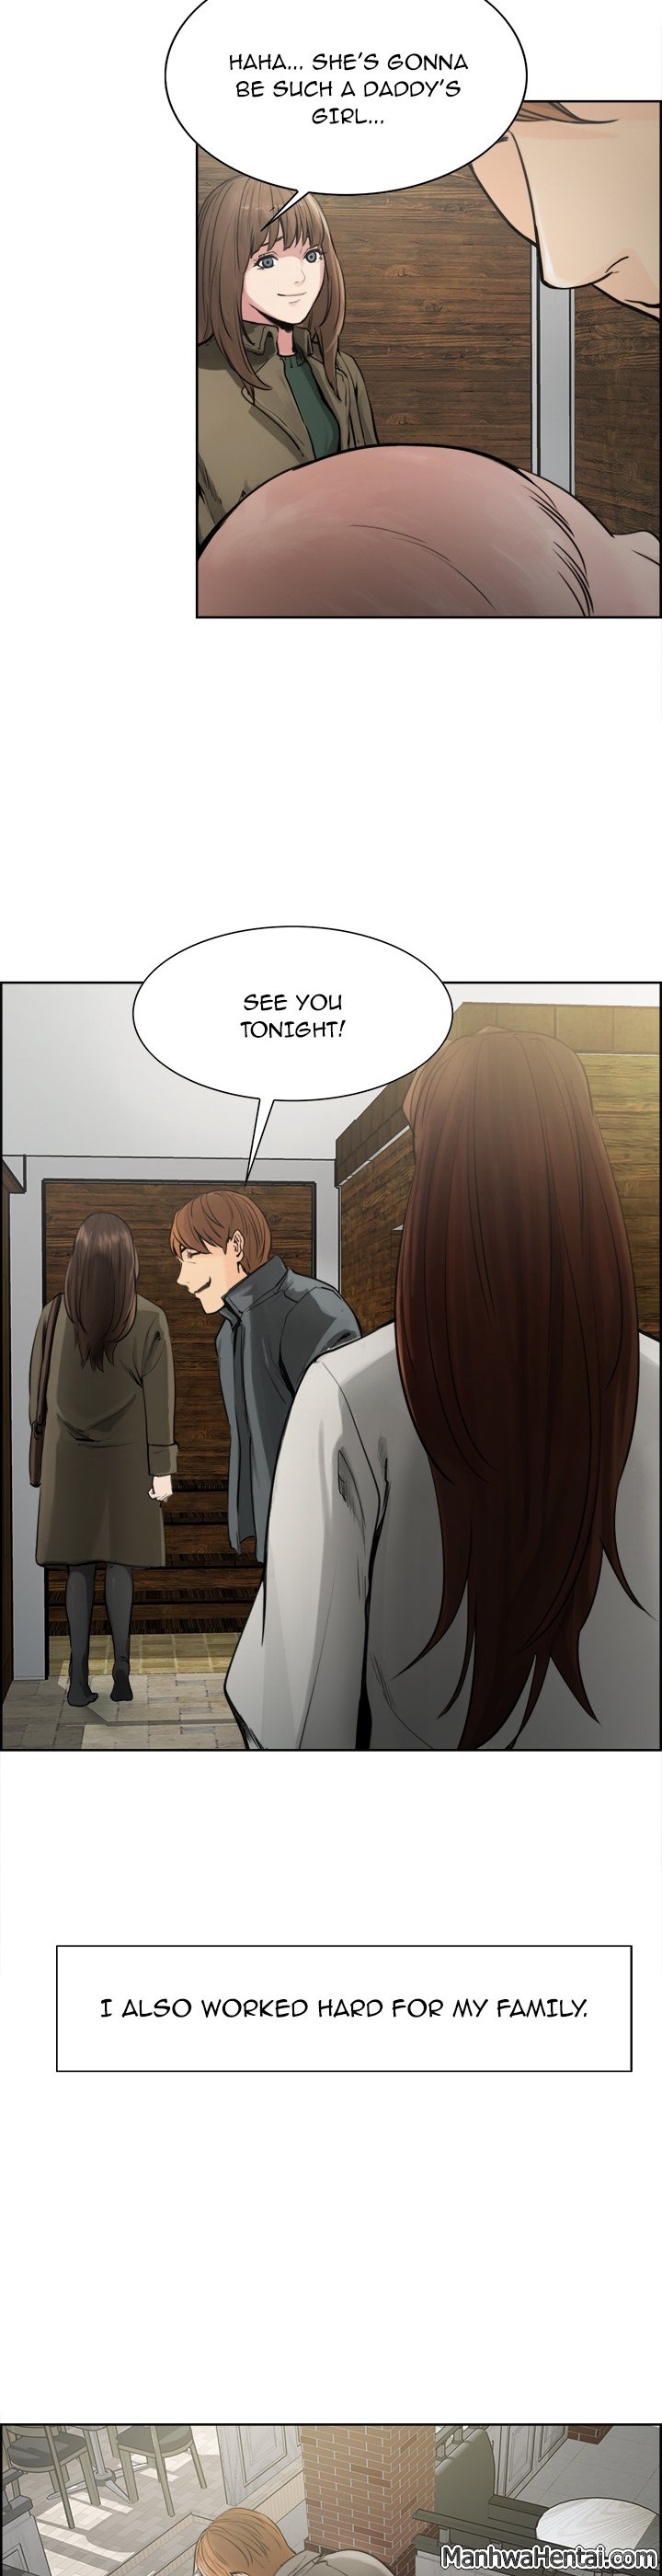 [Serious] The Sharehouse Ch. 1-11 [English] 320